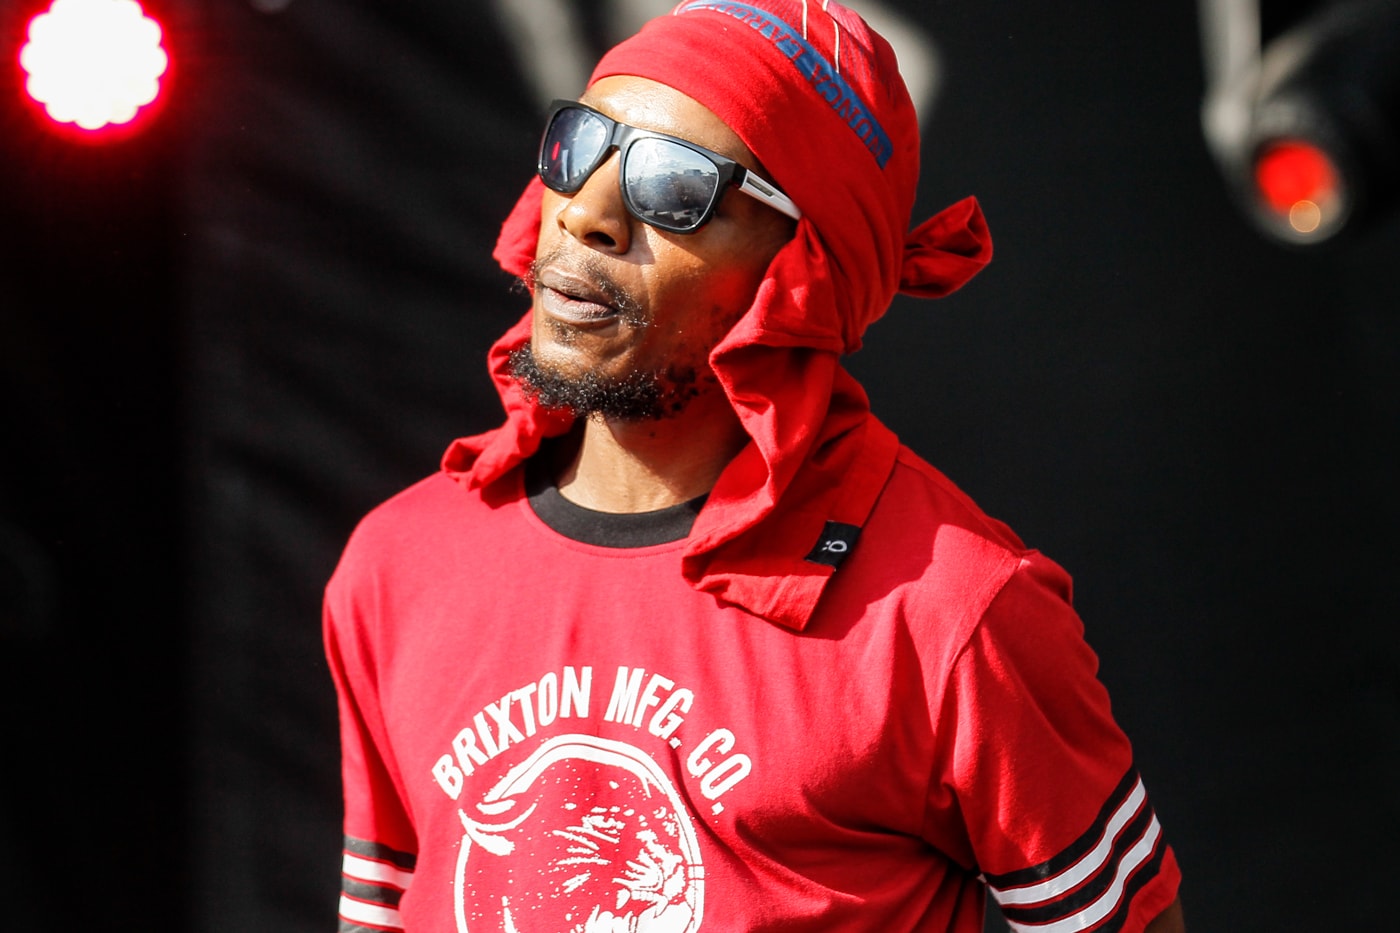 Del the Funky Homosapien Gorillaz Stage Fall Fractured Rib Punctured Lung